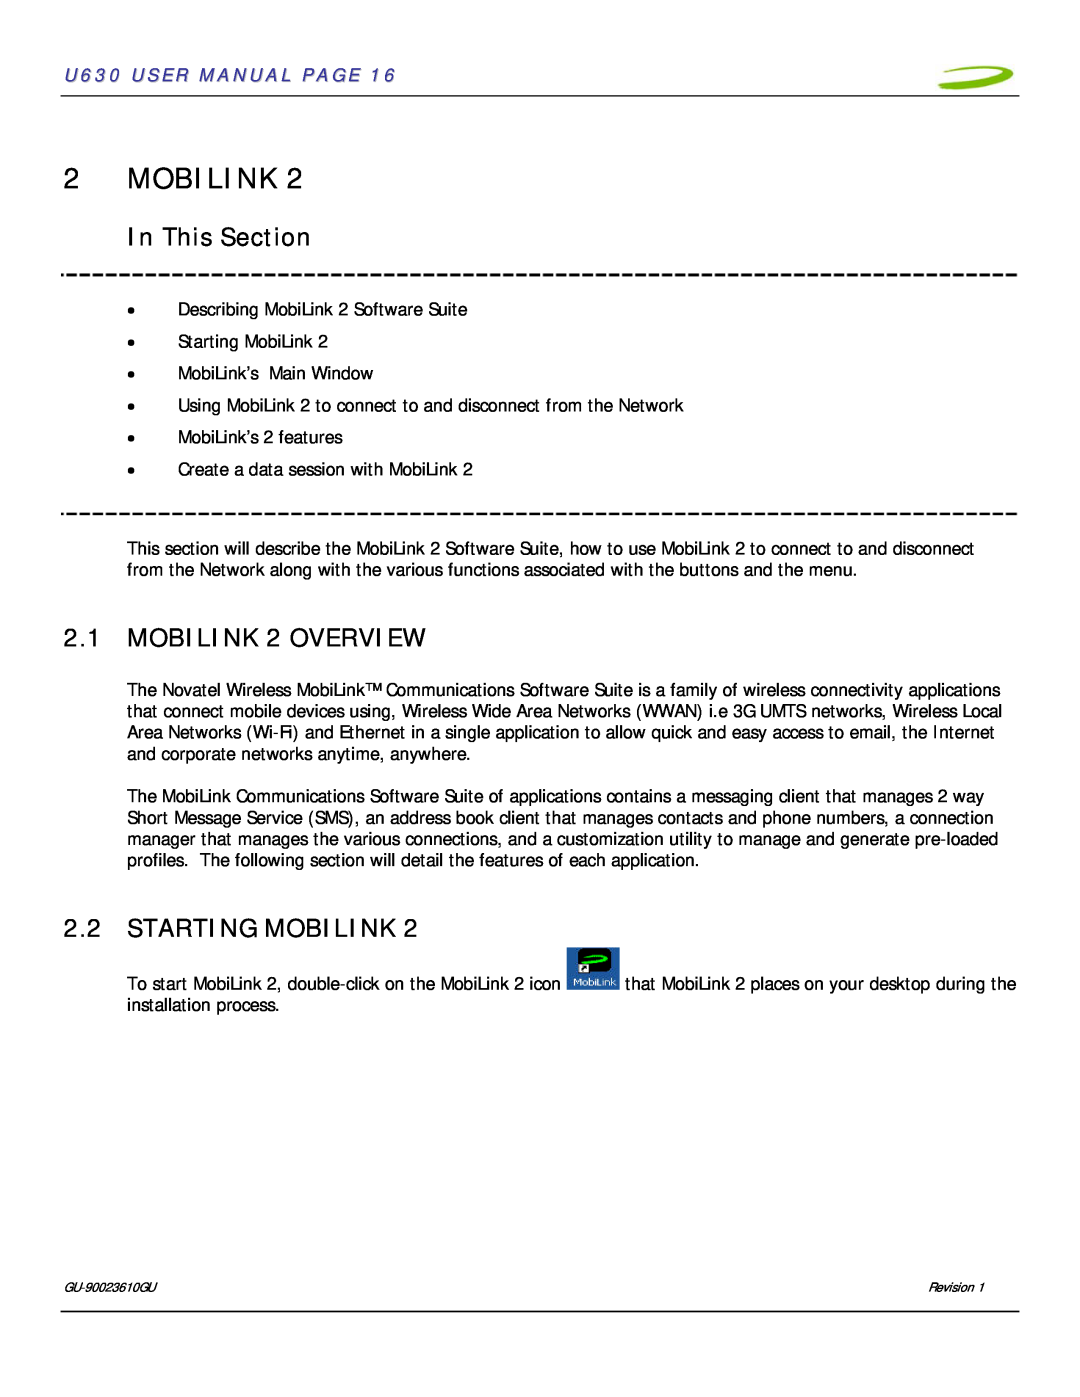 InFocus user manual MOBILINK 2 OVERVIEW, Starting Mobilink, In This Section, U630 USER MANUAL PAGE 